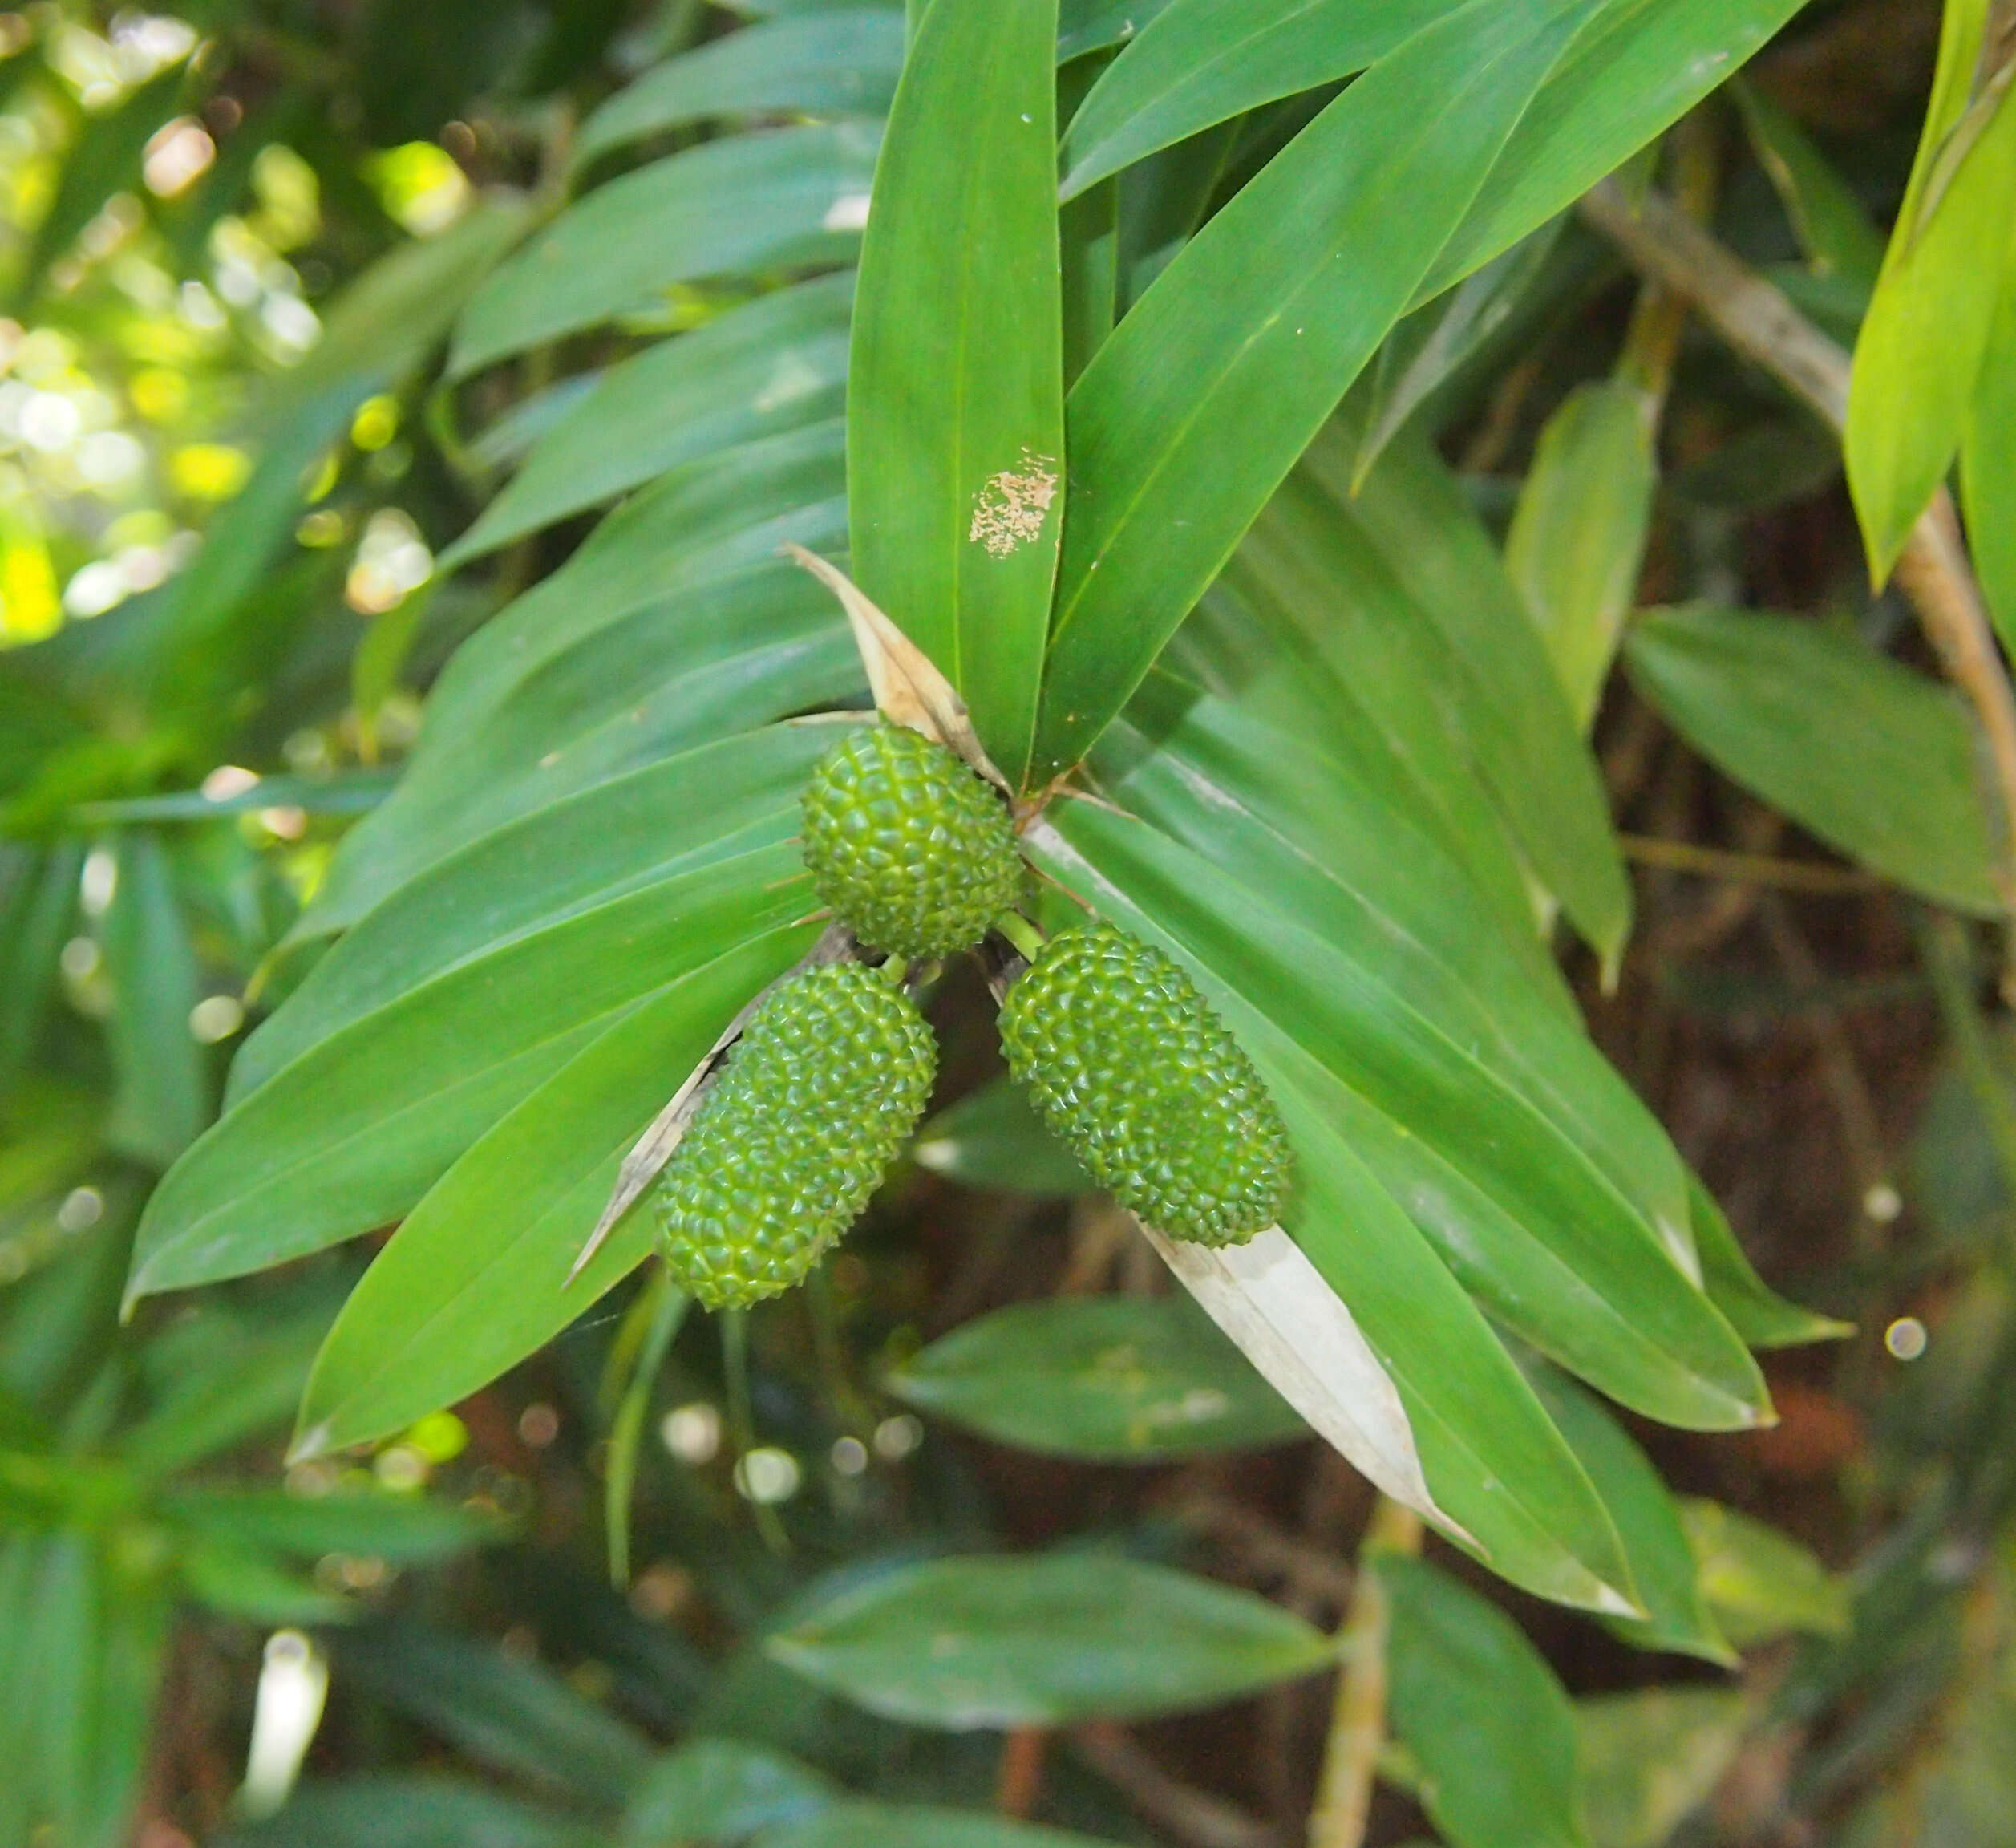 Image of Freycinetia excelsa F. Muell.